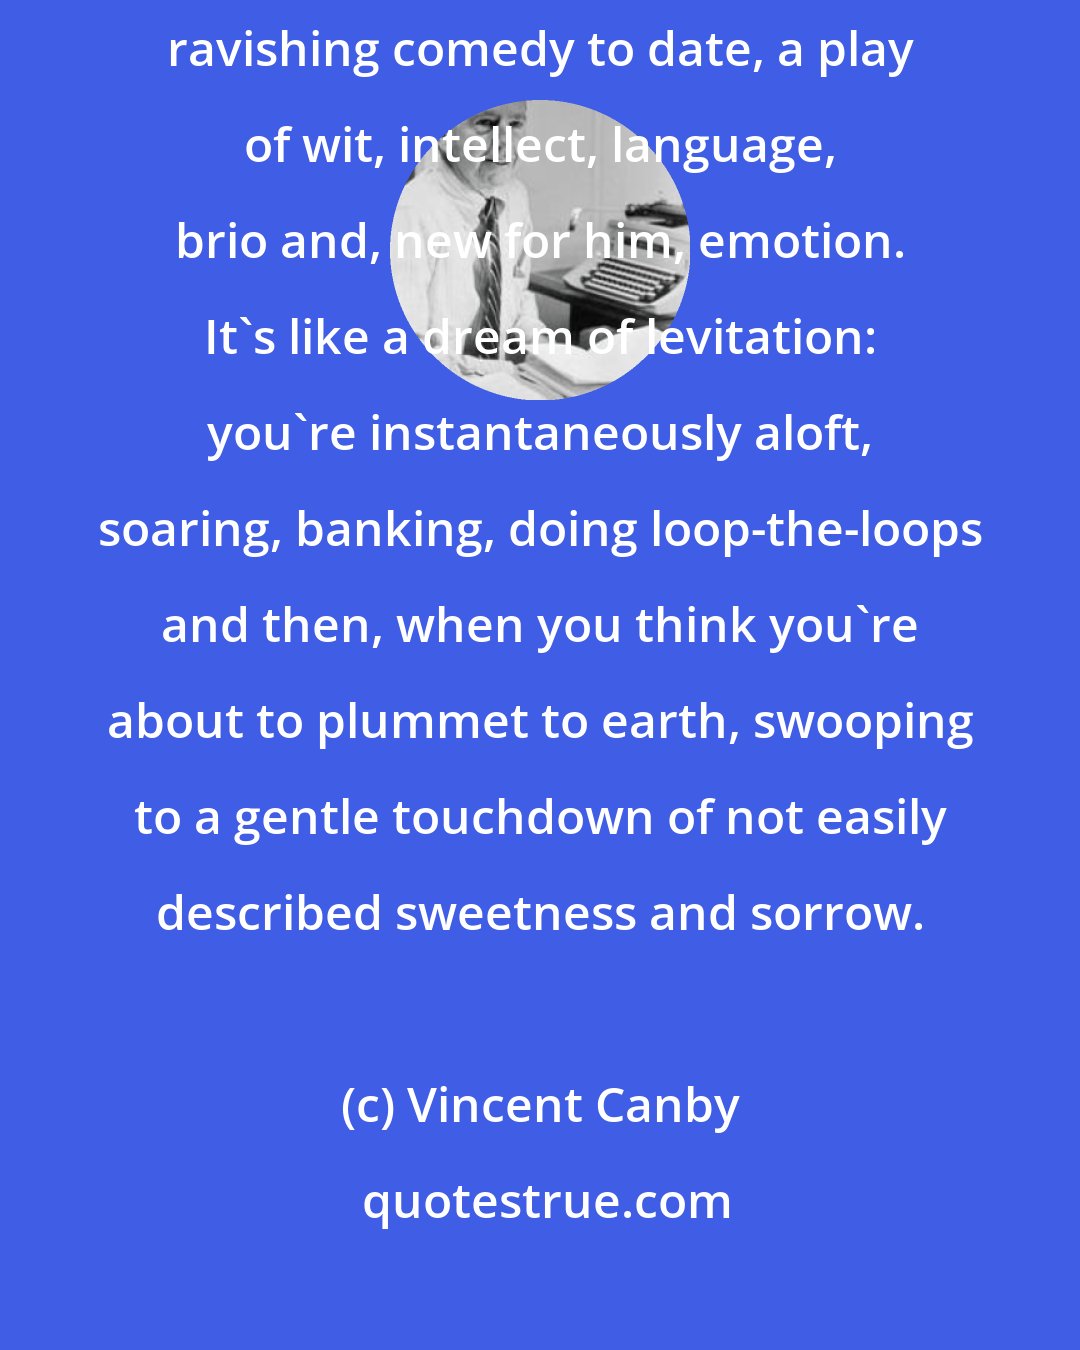 Vincent Canby: There's no doubt about it. Arcadia is Tom Stoppard's richest, most ravishing comedy to date, a play of wit, intellect, language, brio and, new for him, emotion. It's like a dream of levitation: you're instantaneously aloft, soaring, banking, doing loop-the-loops and then, when you think you're about to plummet to earth, swooping to a gentle touchdown of not easily described sweetness and sorrow.